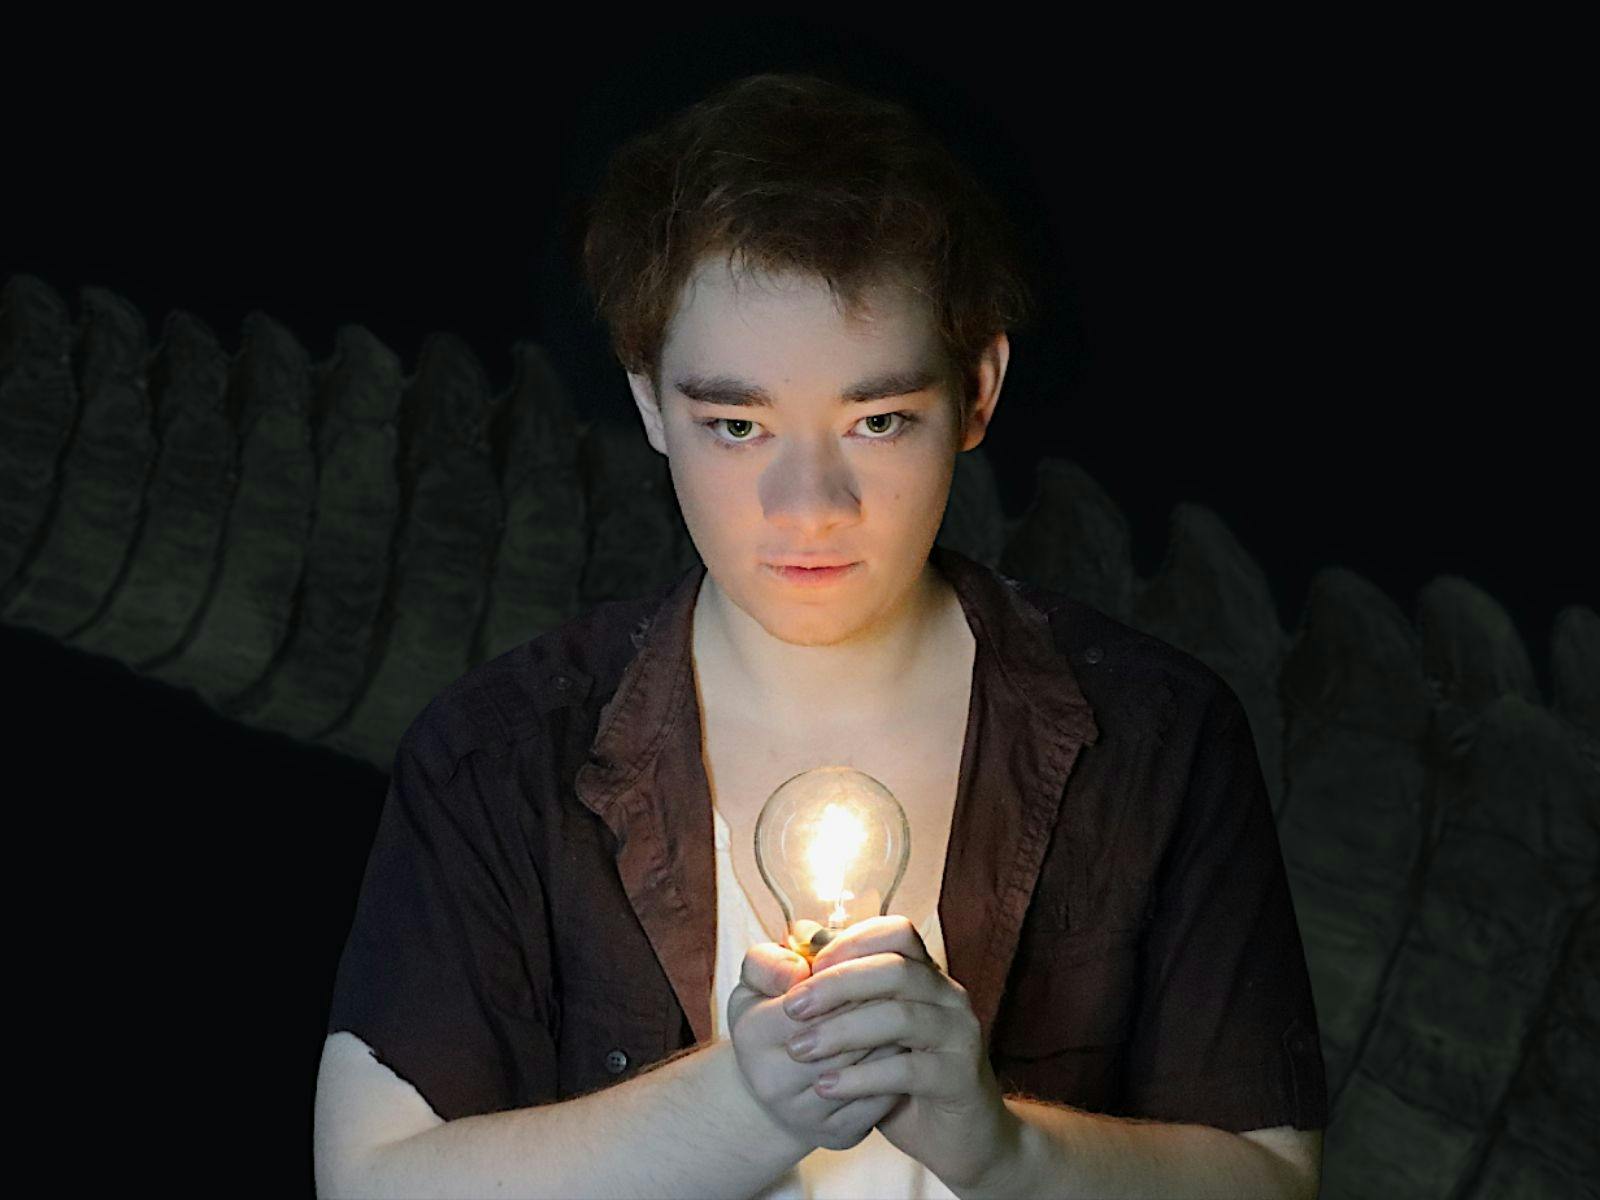 Person dressed as Peter Pan holding a lightbulb,  a crocodile tail in the dark background.